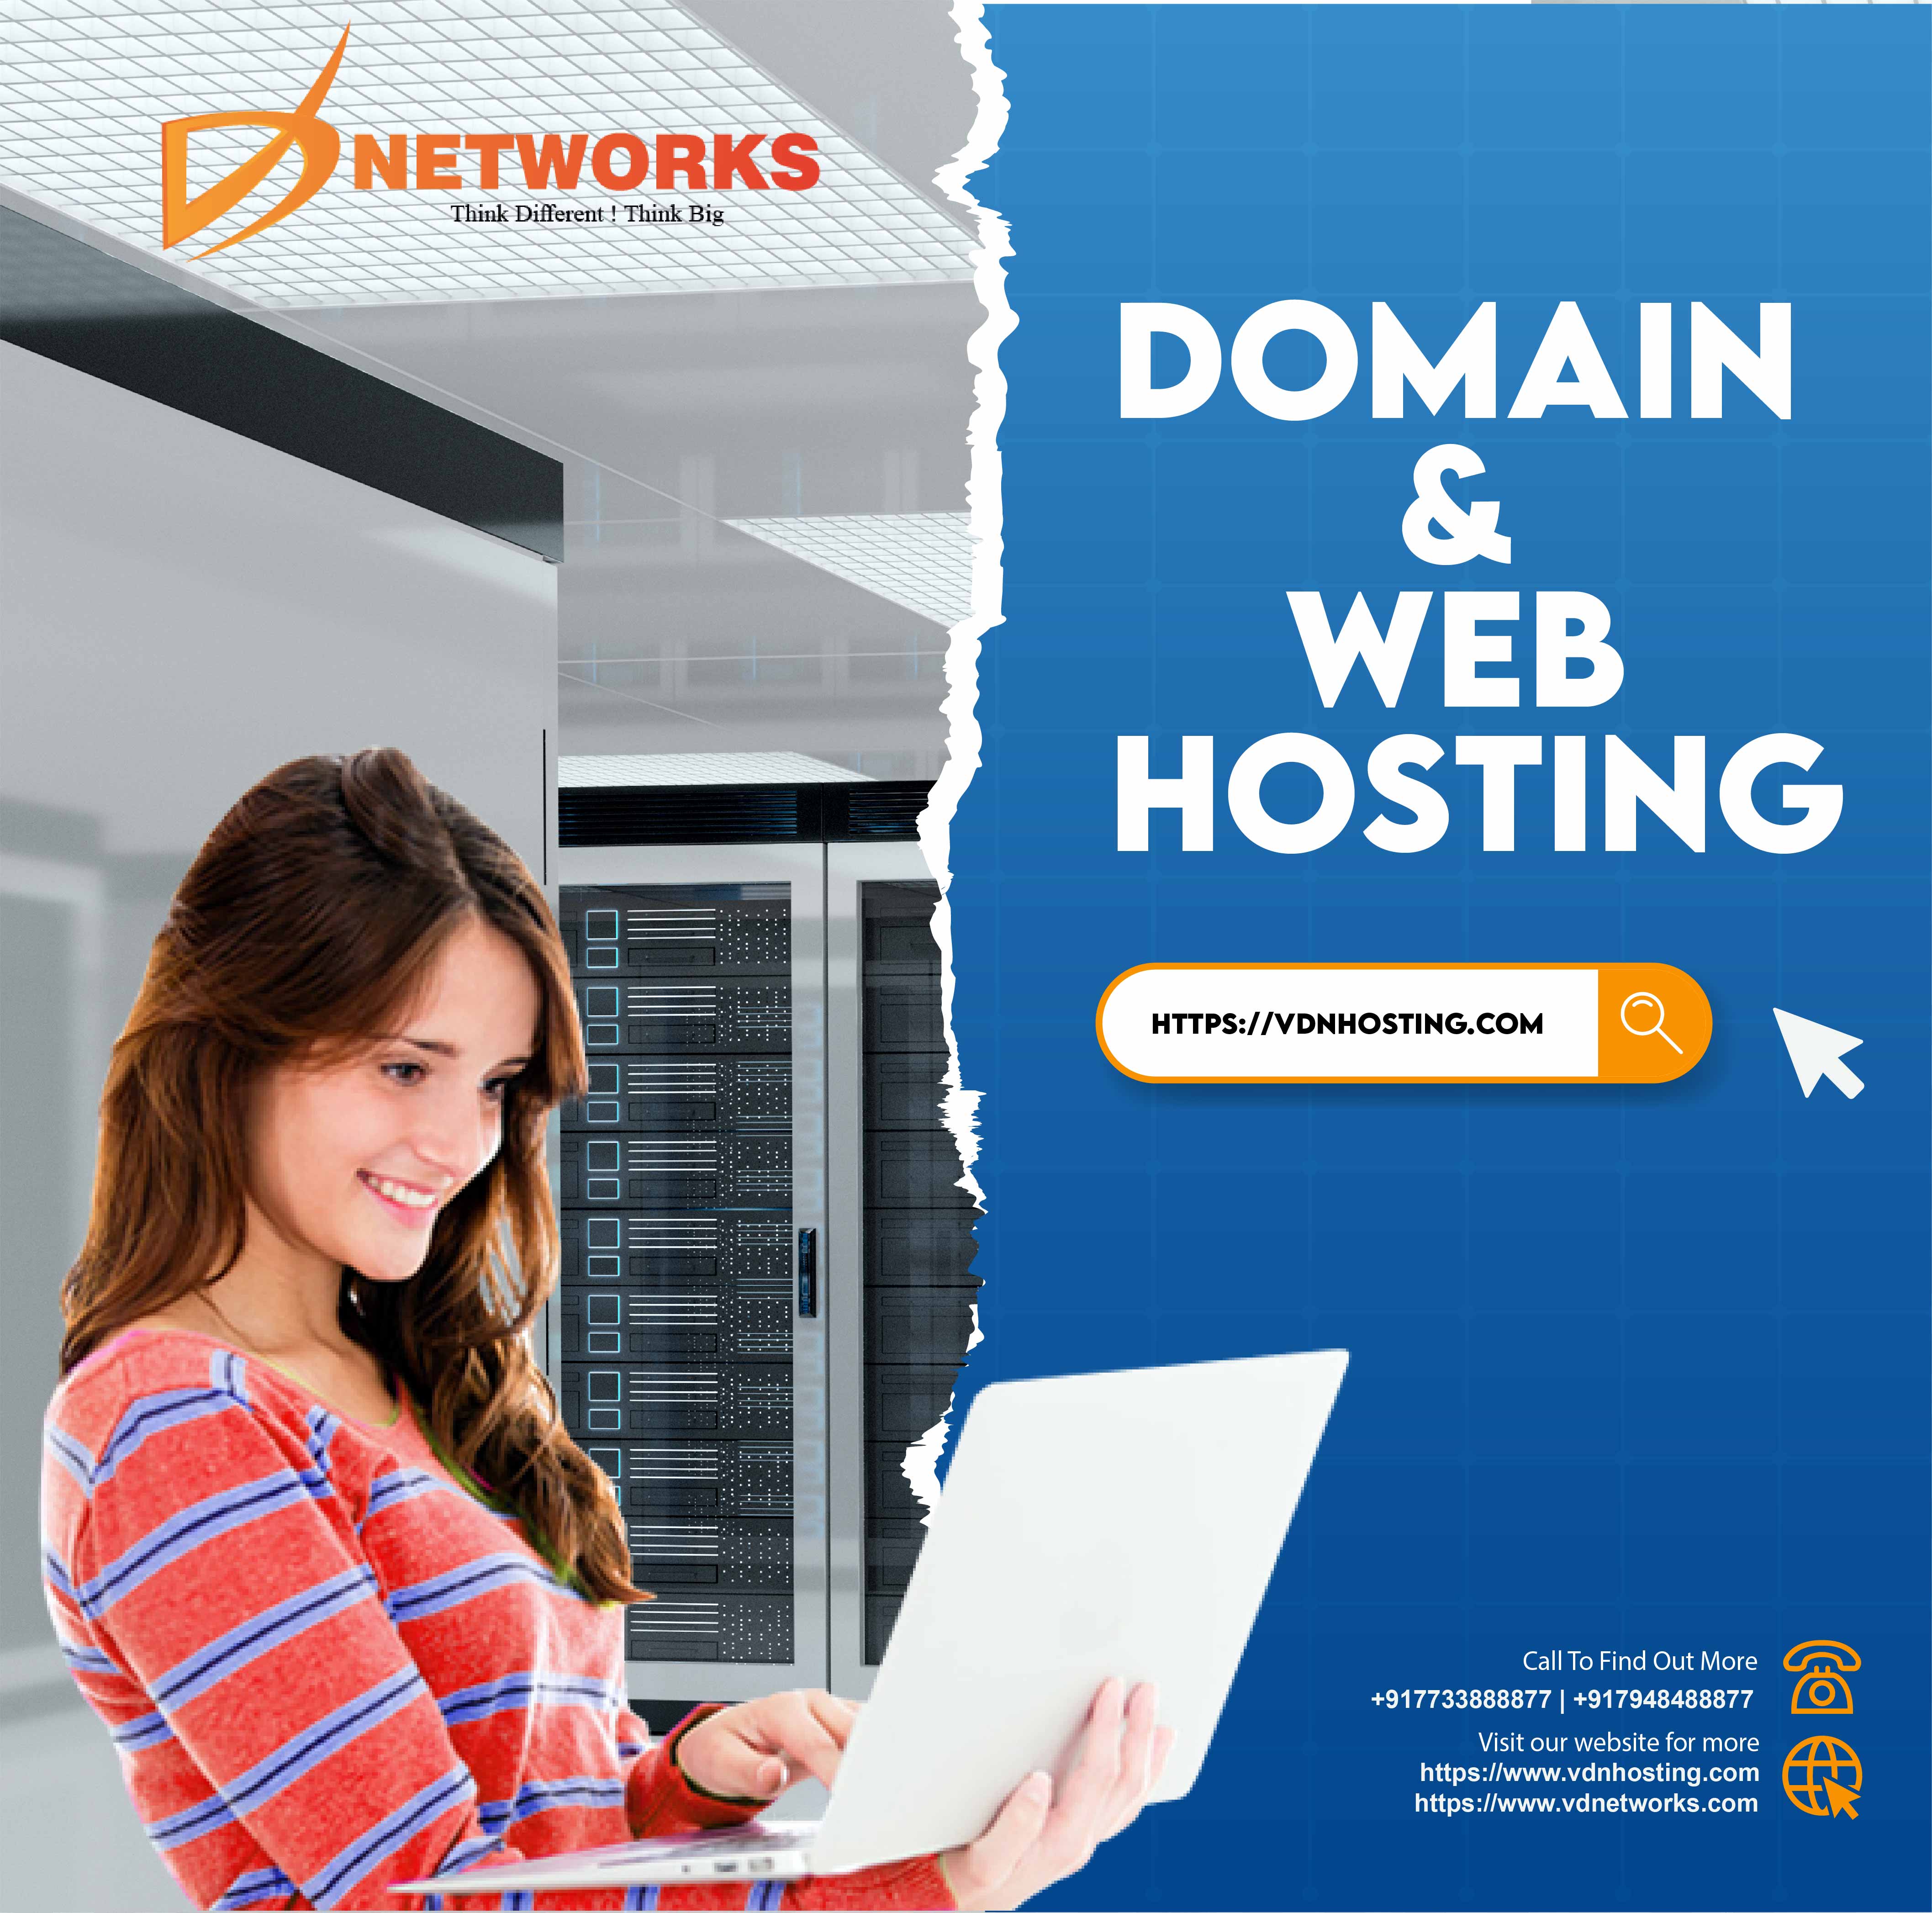 What Is The Difference Between Domain And Web Hosting?